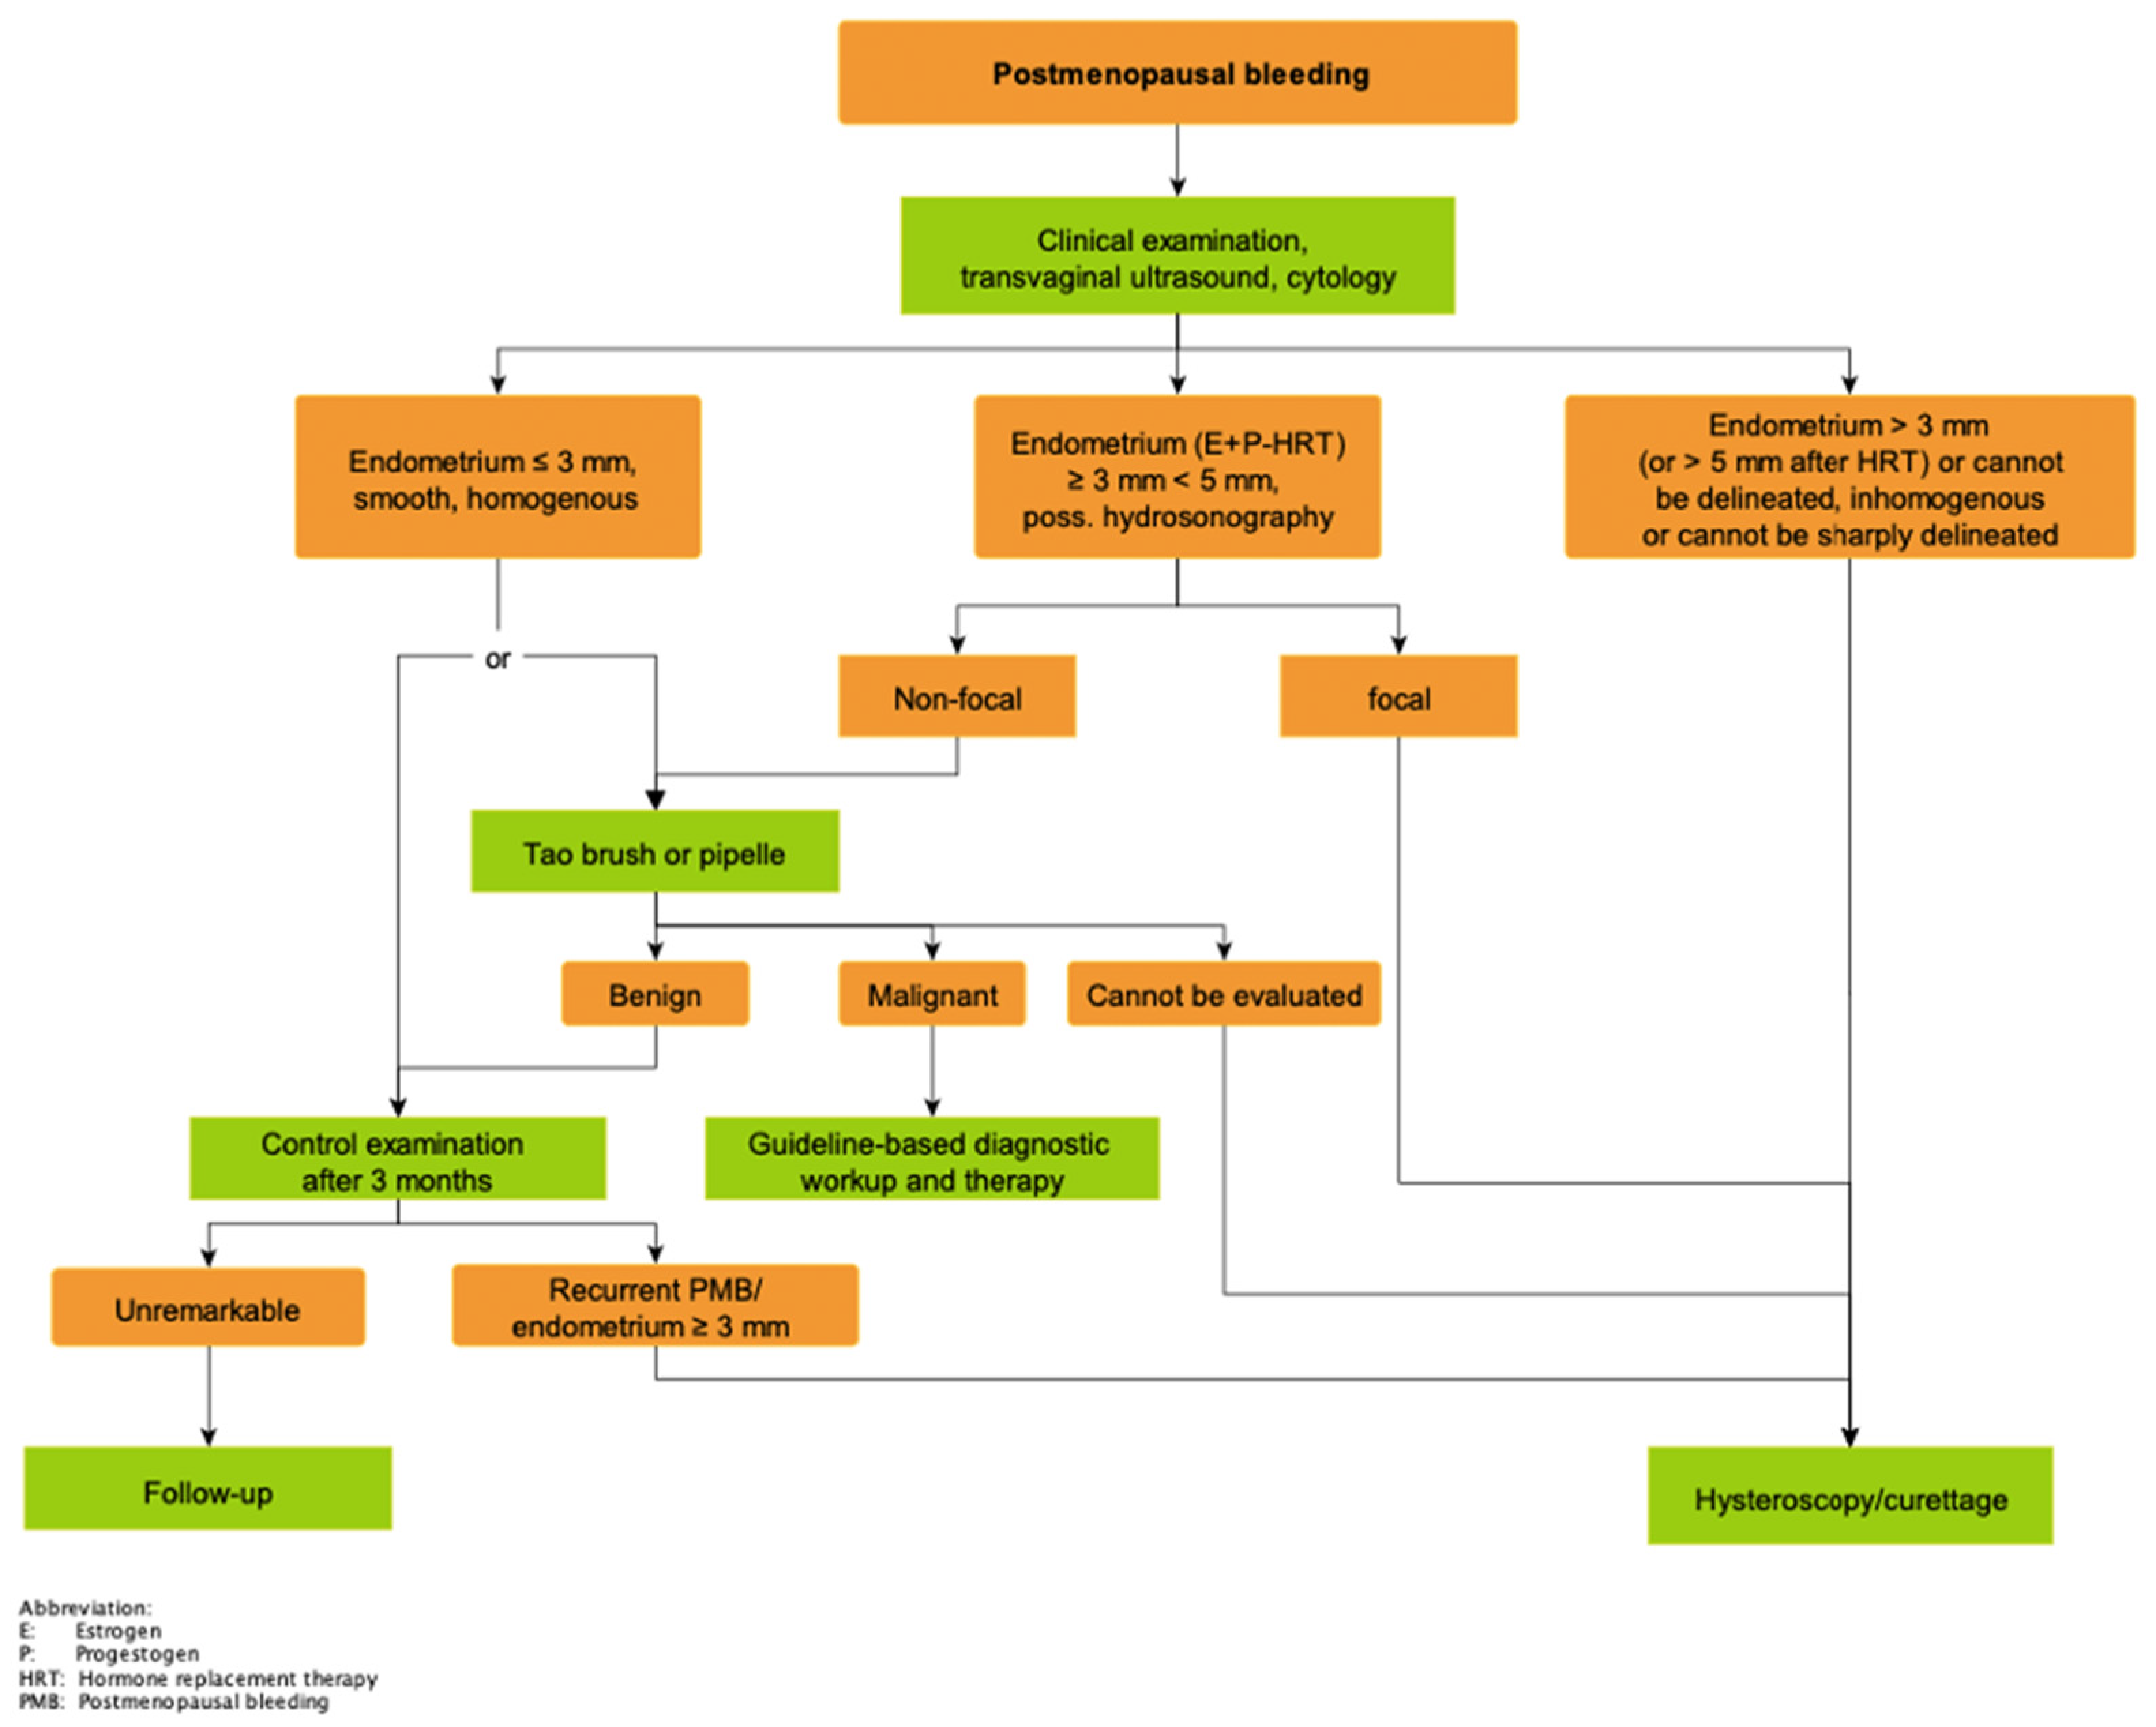 Clinical guidelines for the management of postmenopausal bleeding